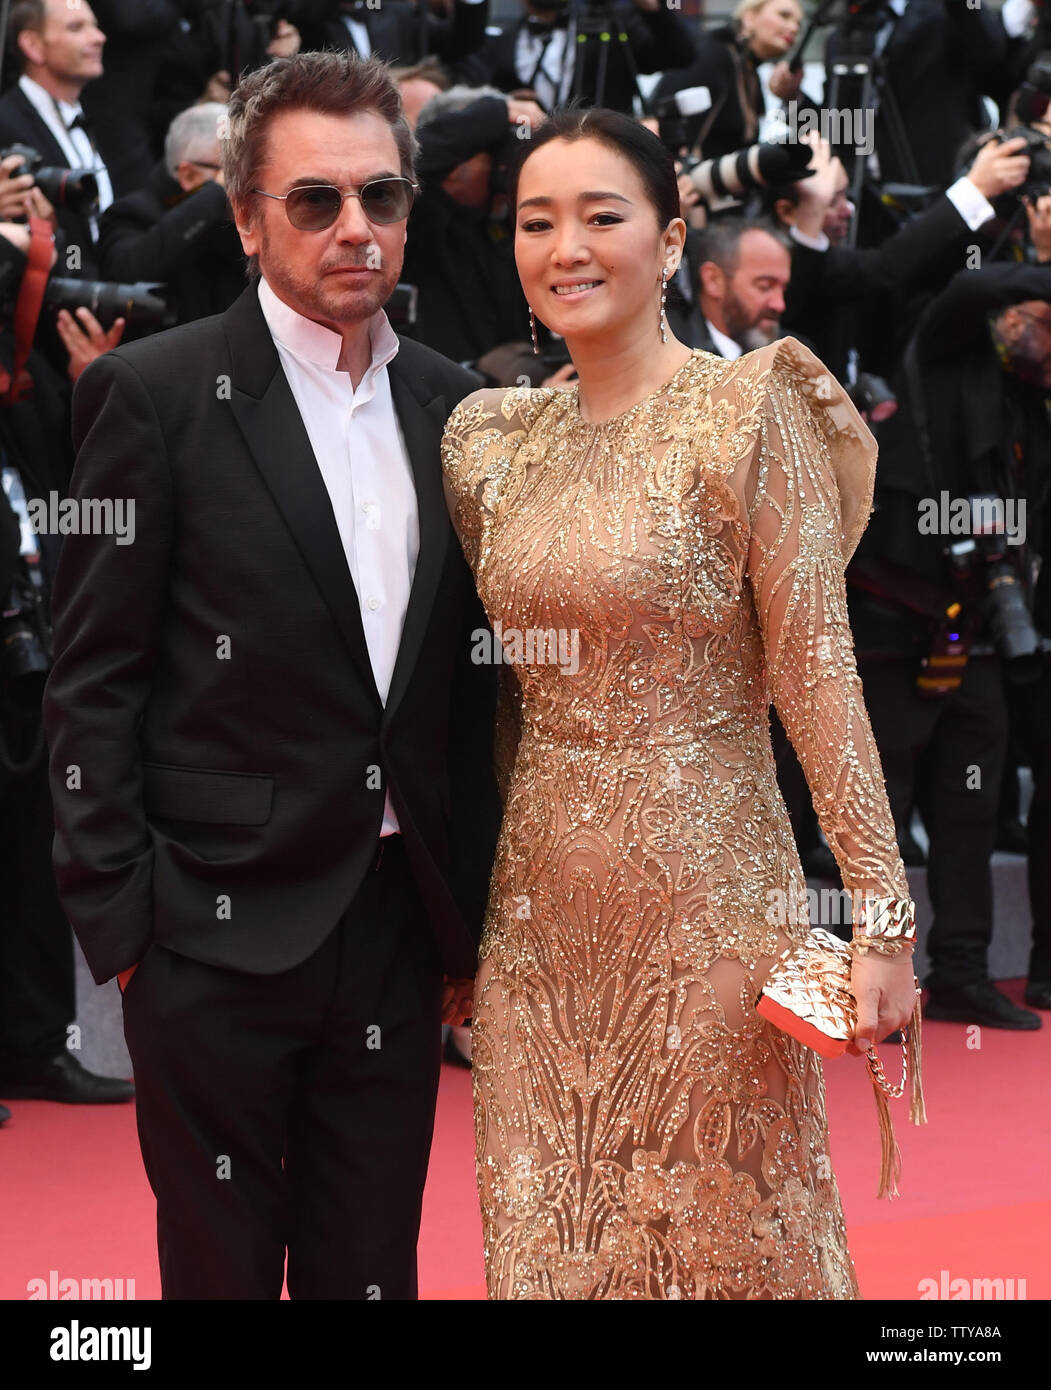 Pain and glory premiere at the 72nd Cannes Film Festival Featuring: Jean  Michel Jarre, Gong Li Where: Cannes, United Kingdom When: 17 May 2019  Credit: WENN.com Stock Photo - Alamy